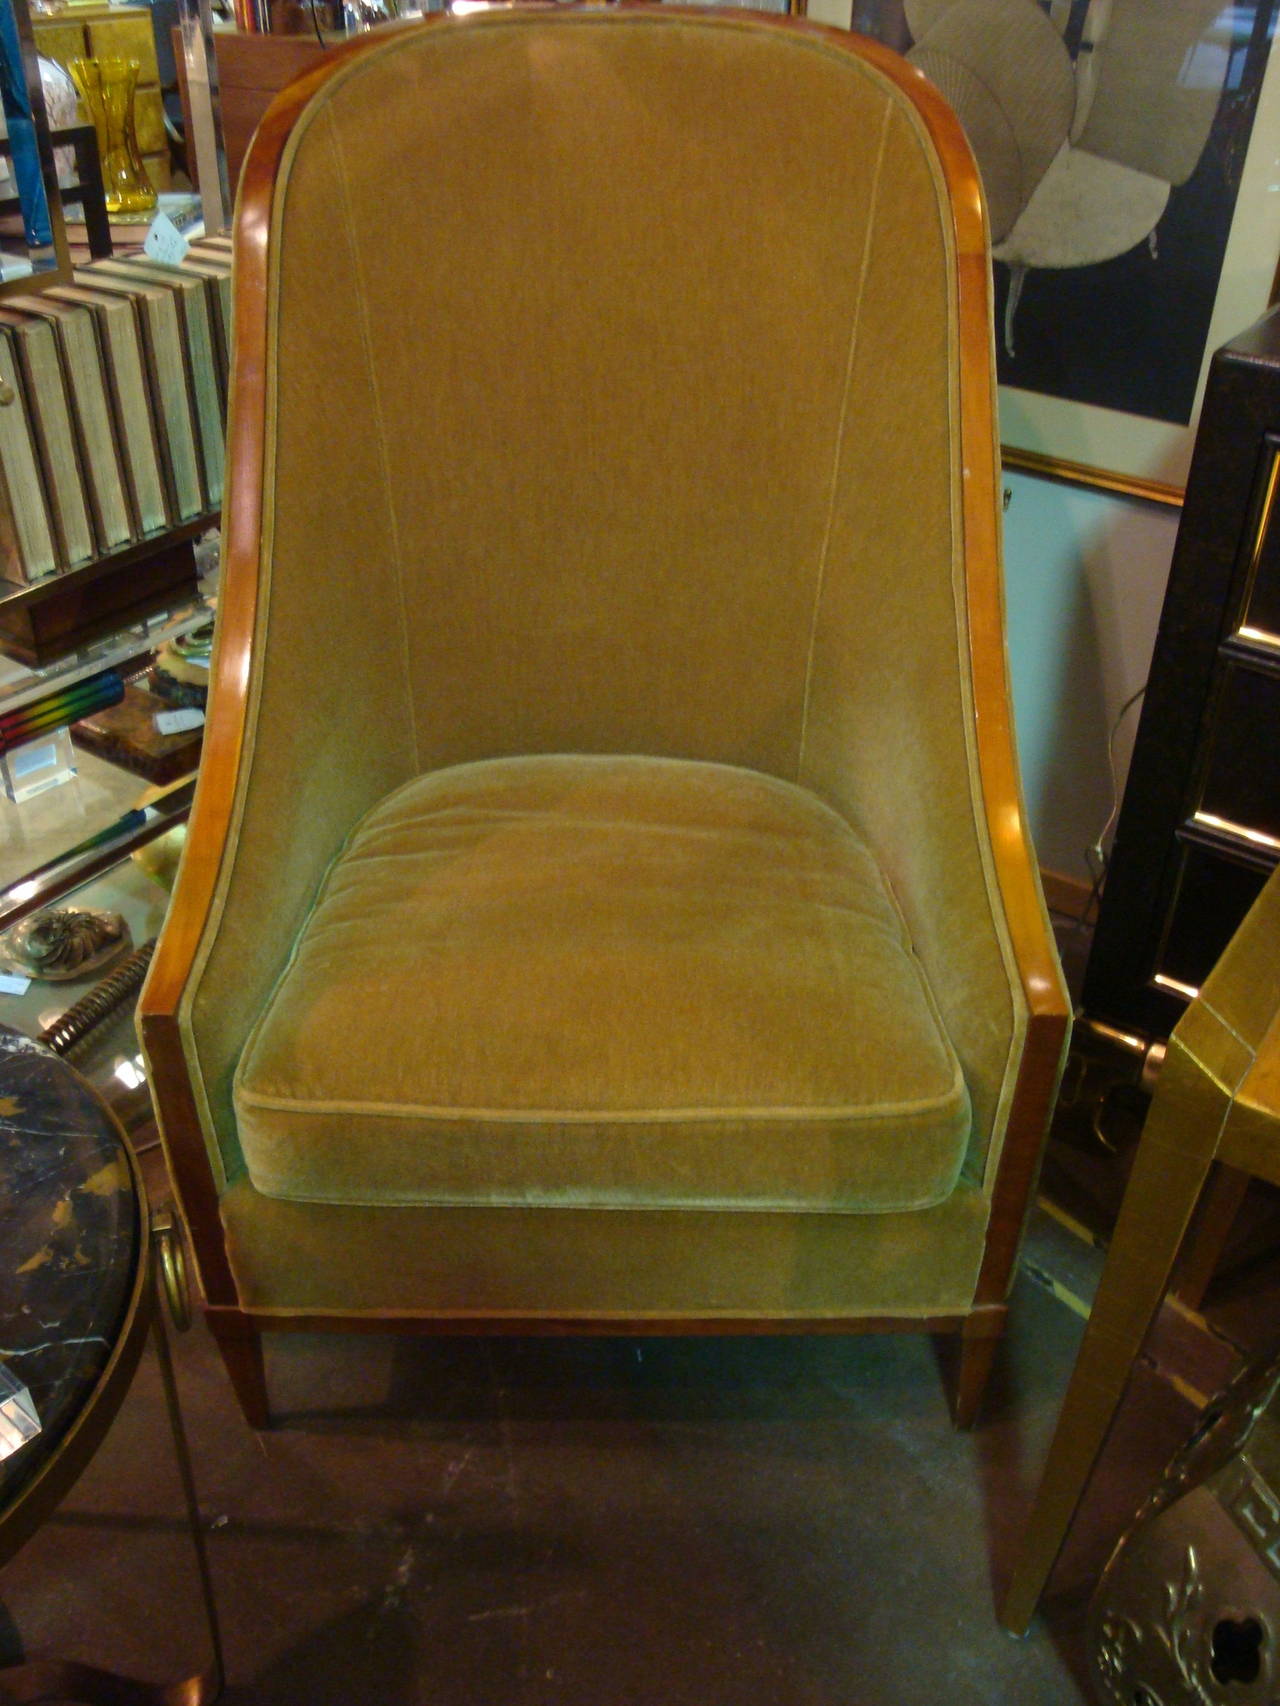 This is a pair of Mohair deco style fruitwood side chairs